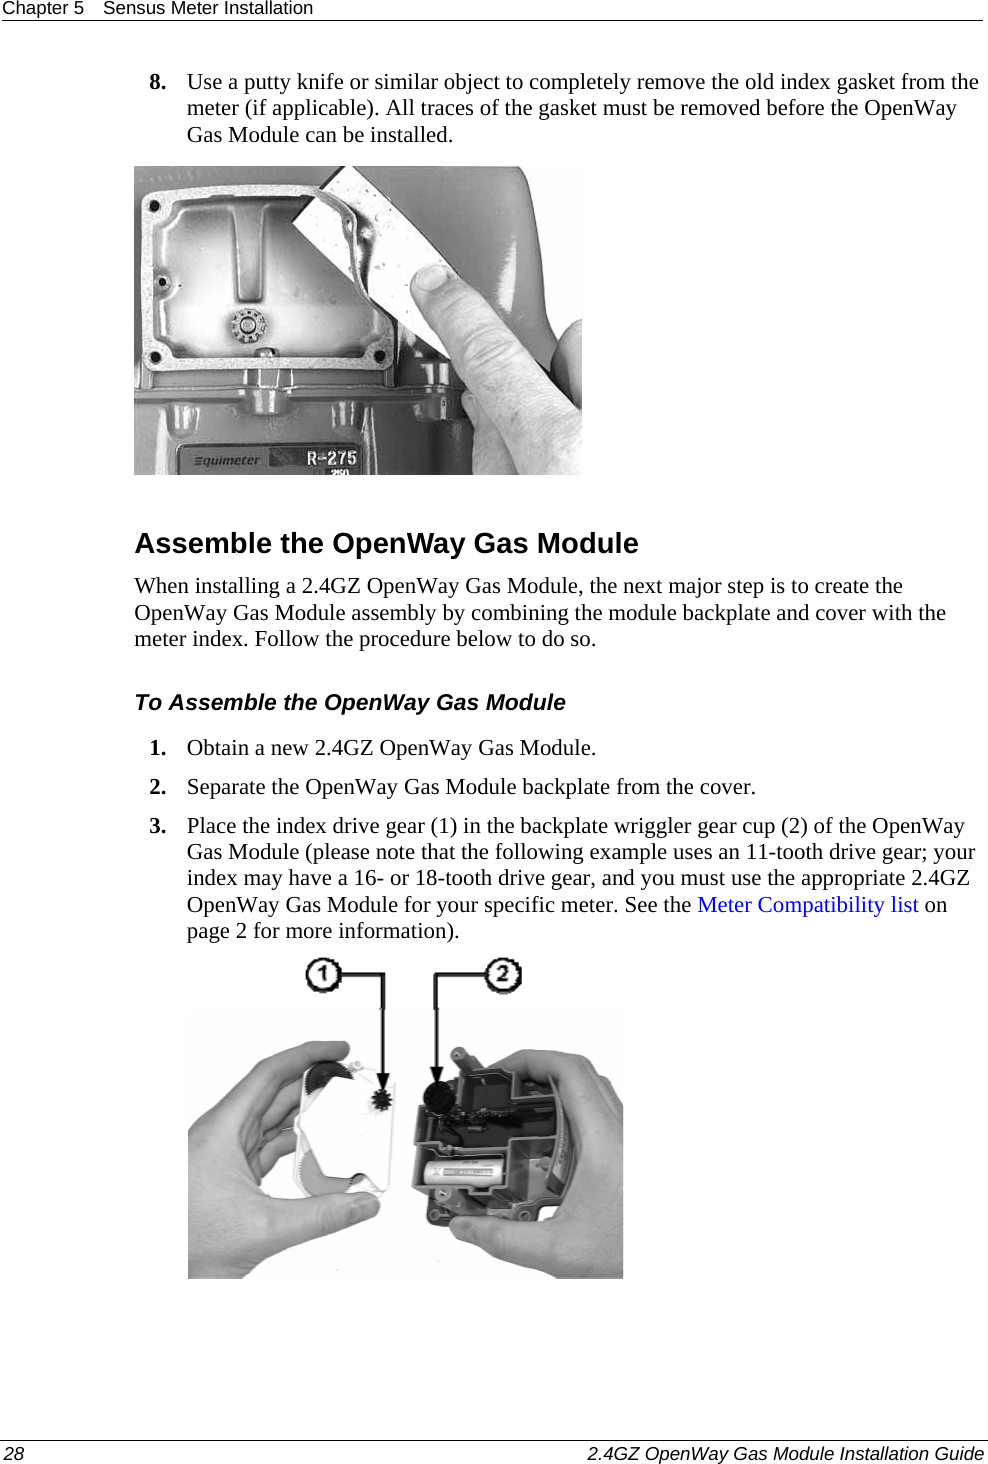 Chapter 5  Sensus Meter Installation  28    2.4GZ OpenWay Gas Module Installation Guide  8. Use a putty knife or similar object to completely remove the old index gasket from the meter (if applicable). All traces of the gasket must be removed before the OpenWay Gas Module can be installed.     Assemble the OpenWay Gas Module When installing a 2.4GZ OpenWay Gas Module, the next major step is to create the OpenWay Gas Module assembly by combining the module backplate and cover with the meter index. Follow the procedure below to do so. To Assemble the OpenWay Gas Module 1. Obtain a new 2.4GZ OpenWay Gas Module.  2. Separate the OpenWay Gas Module backplate from the cover.  3. Place the index drive gear (1) in the backplate wriggler gear cup (2) of the OpenWay Gas Module (please note that the following example uses an 11-tooth drive gear; your index may have a 16- or 18-tooth drive gear, and you must use the appropriate 2.4GZ OpenWay Gas Module for your specific meter. See the Meter Compatibility list on page 2 for more information).    